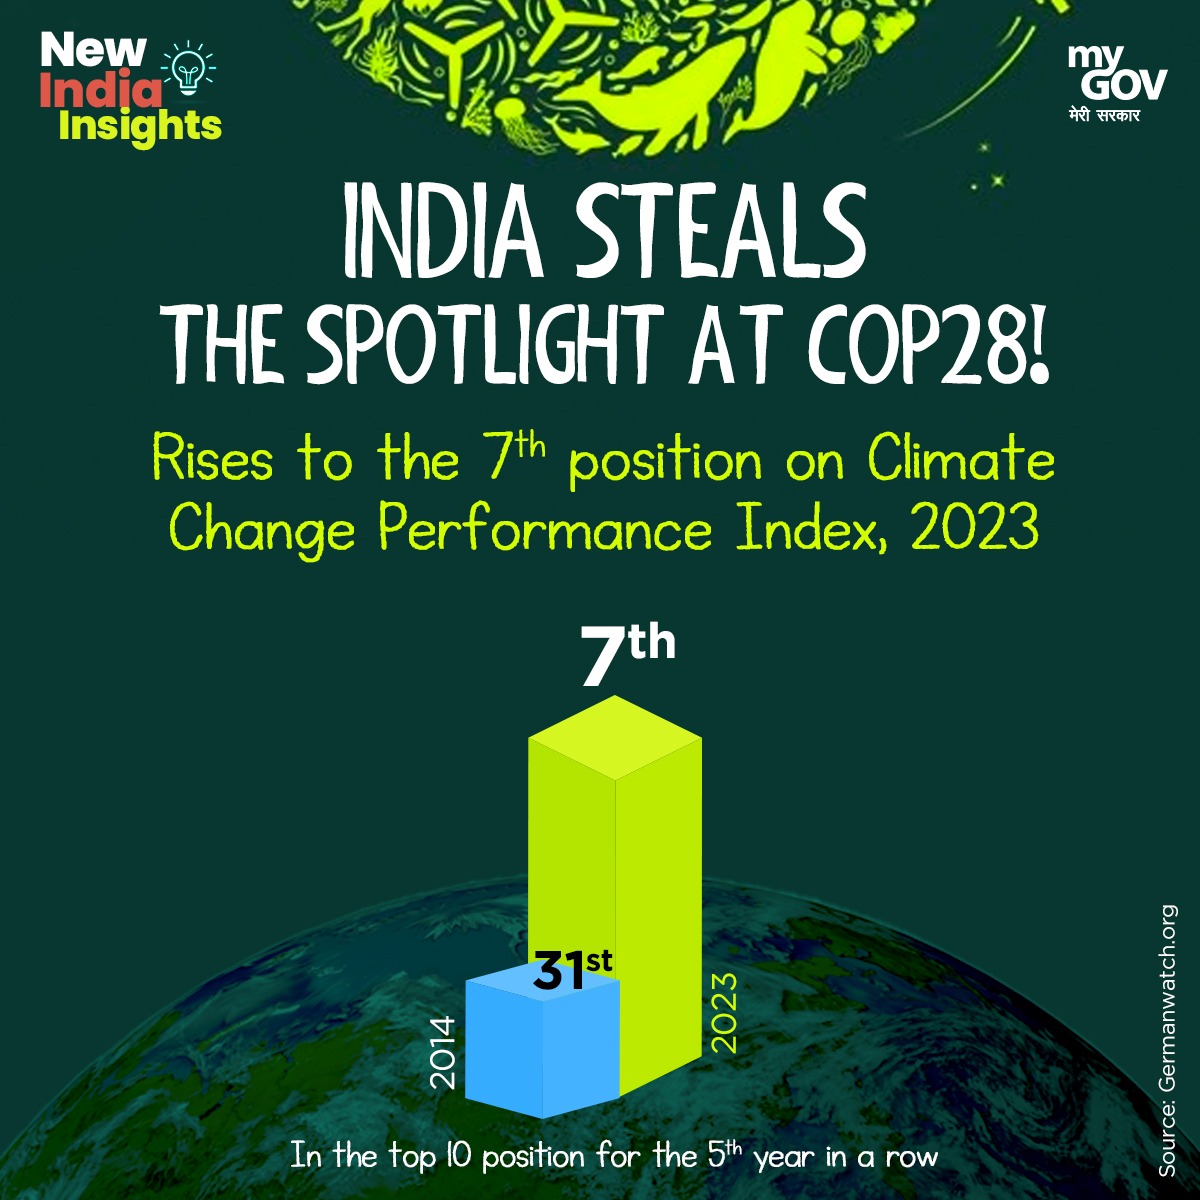 In the grand event of COP 28, India takes the spotlight! Soaring to the 7th position on the Climate Change Performance Index 2023, India's commitment to a sustainable future stands tall. #COP28 #NewIndia #ClimateChangePerformanceIndex